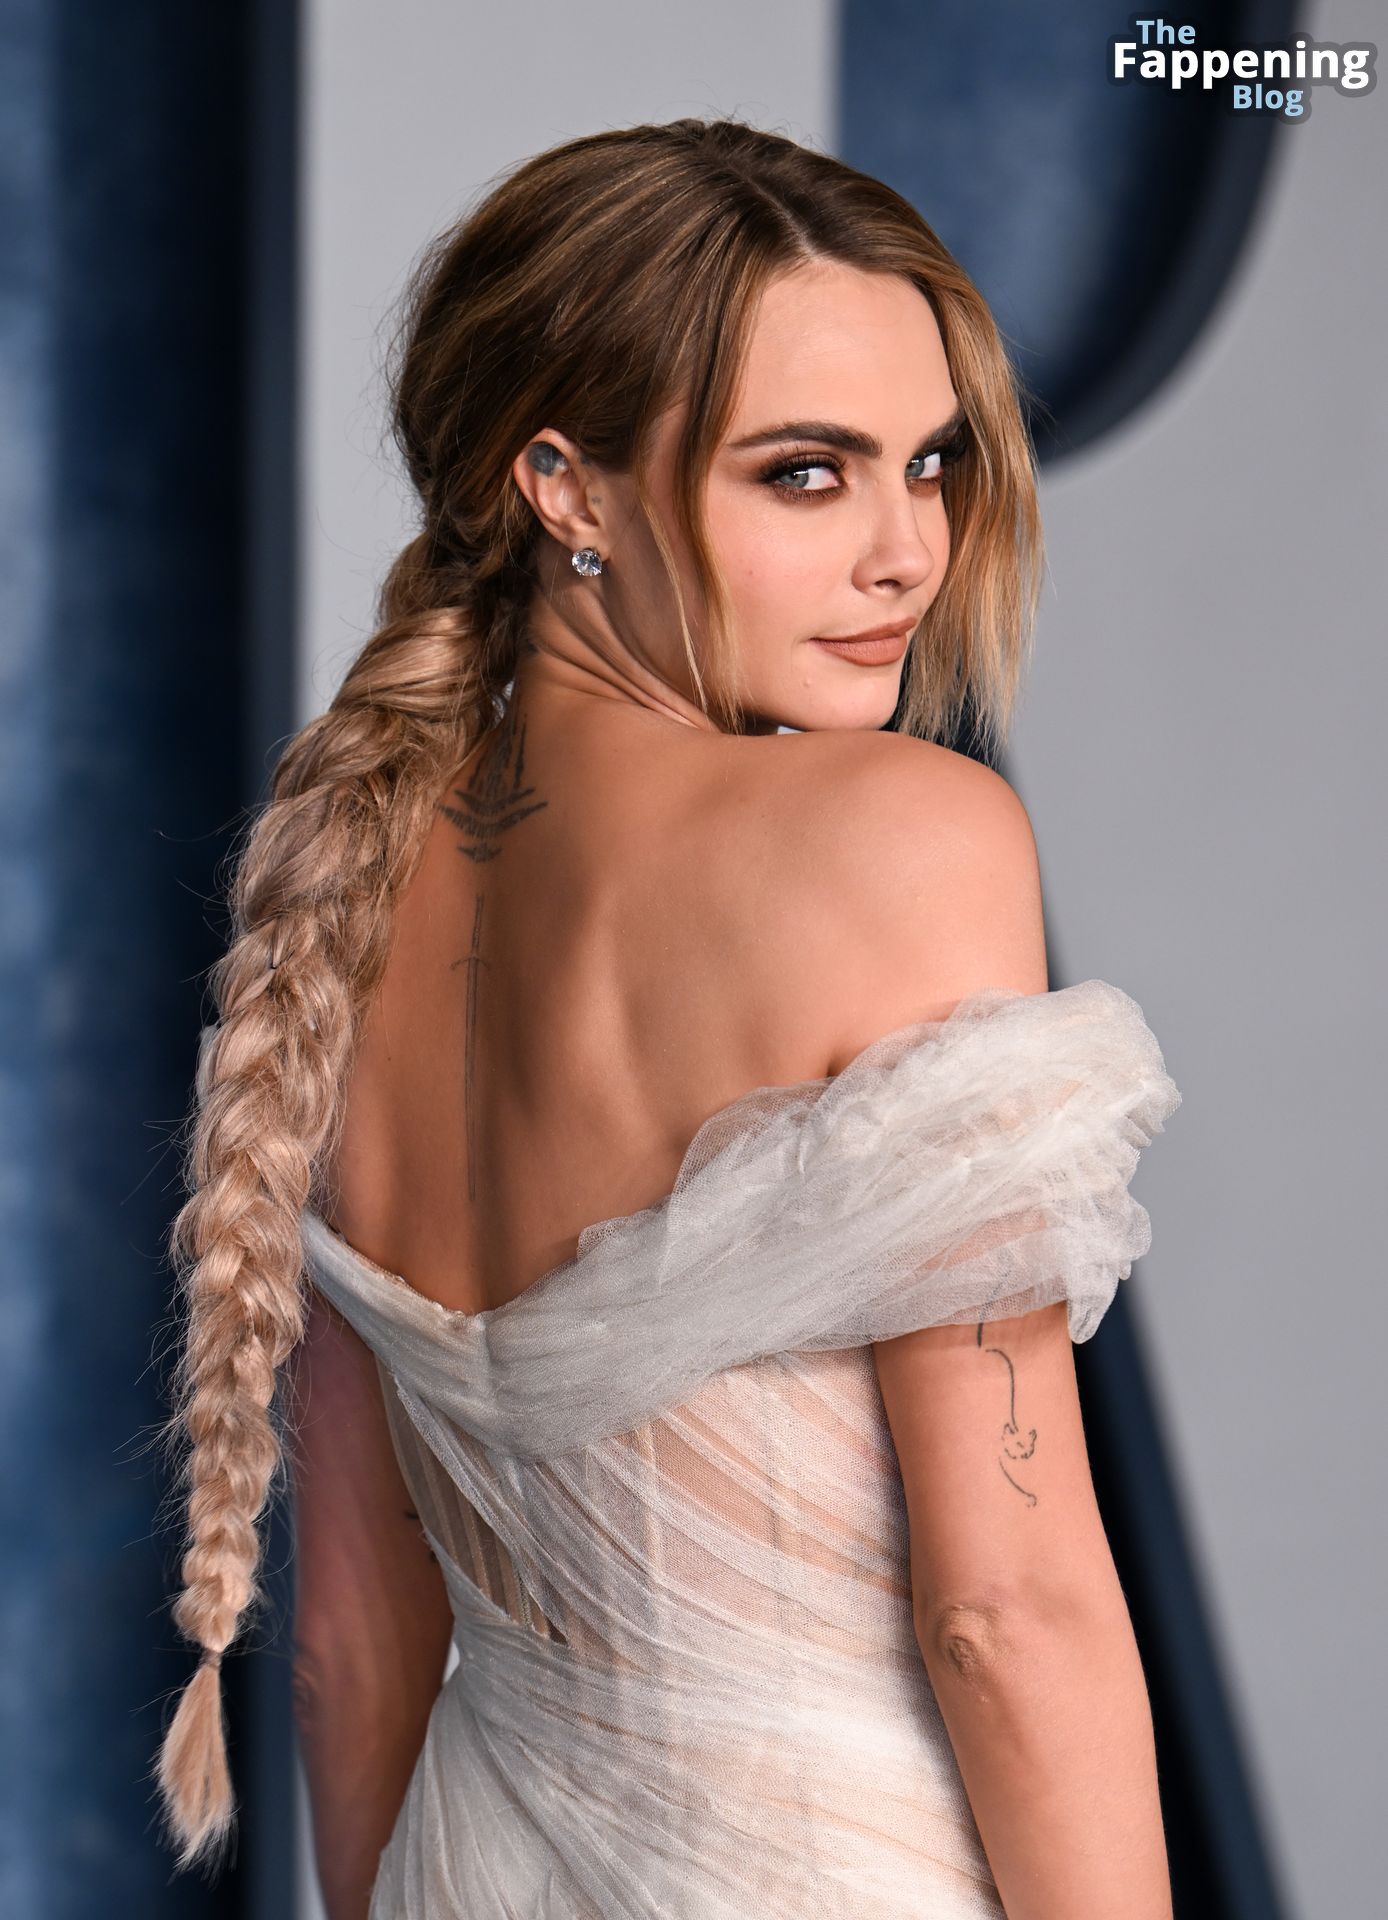 Cara-Delevingne-Sexy-The-Fappening-Blog-10.jpg